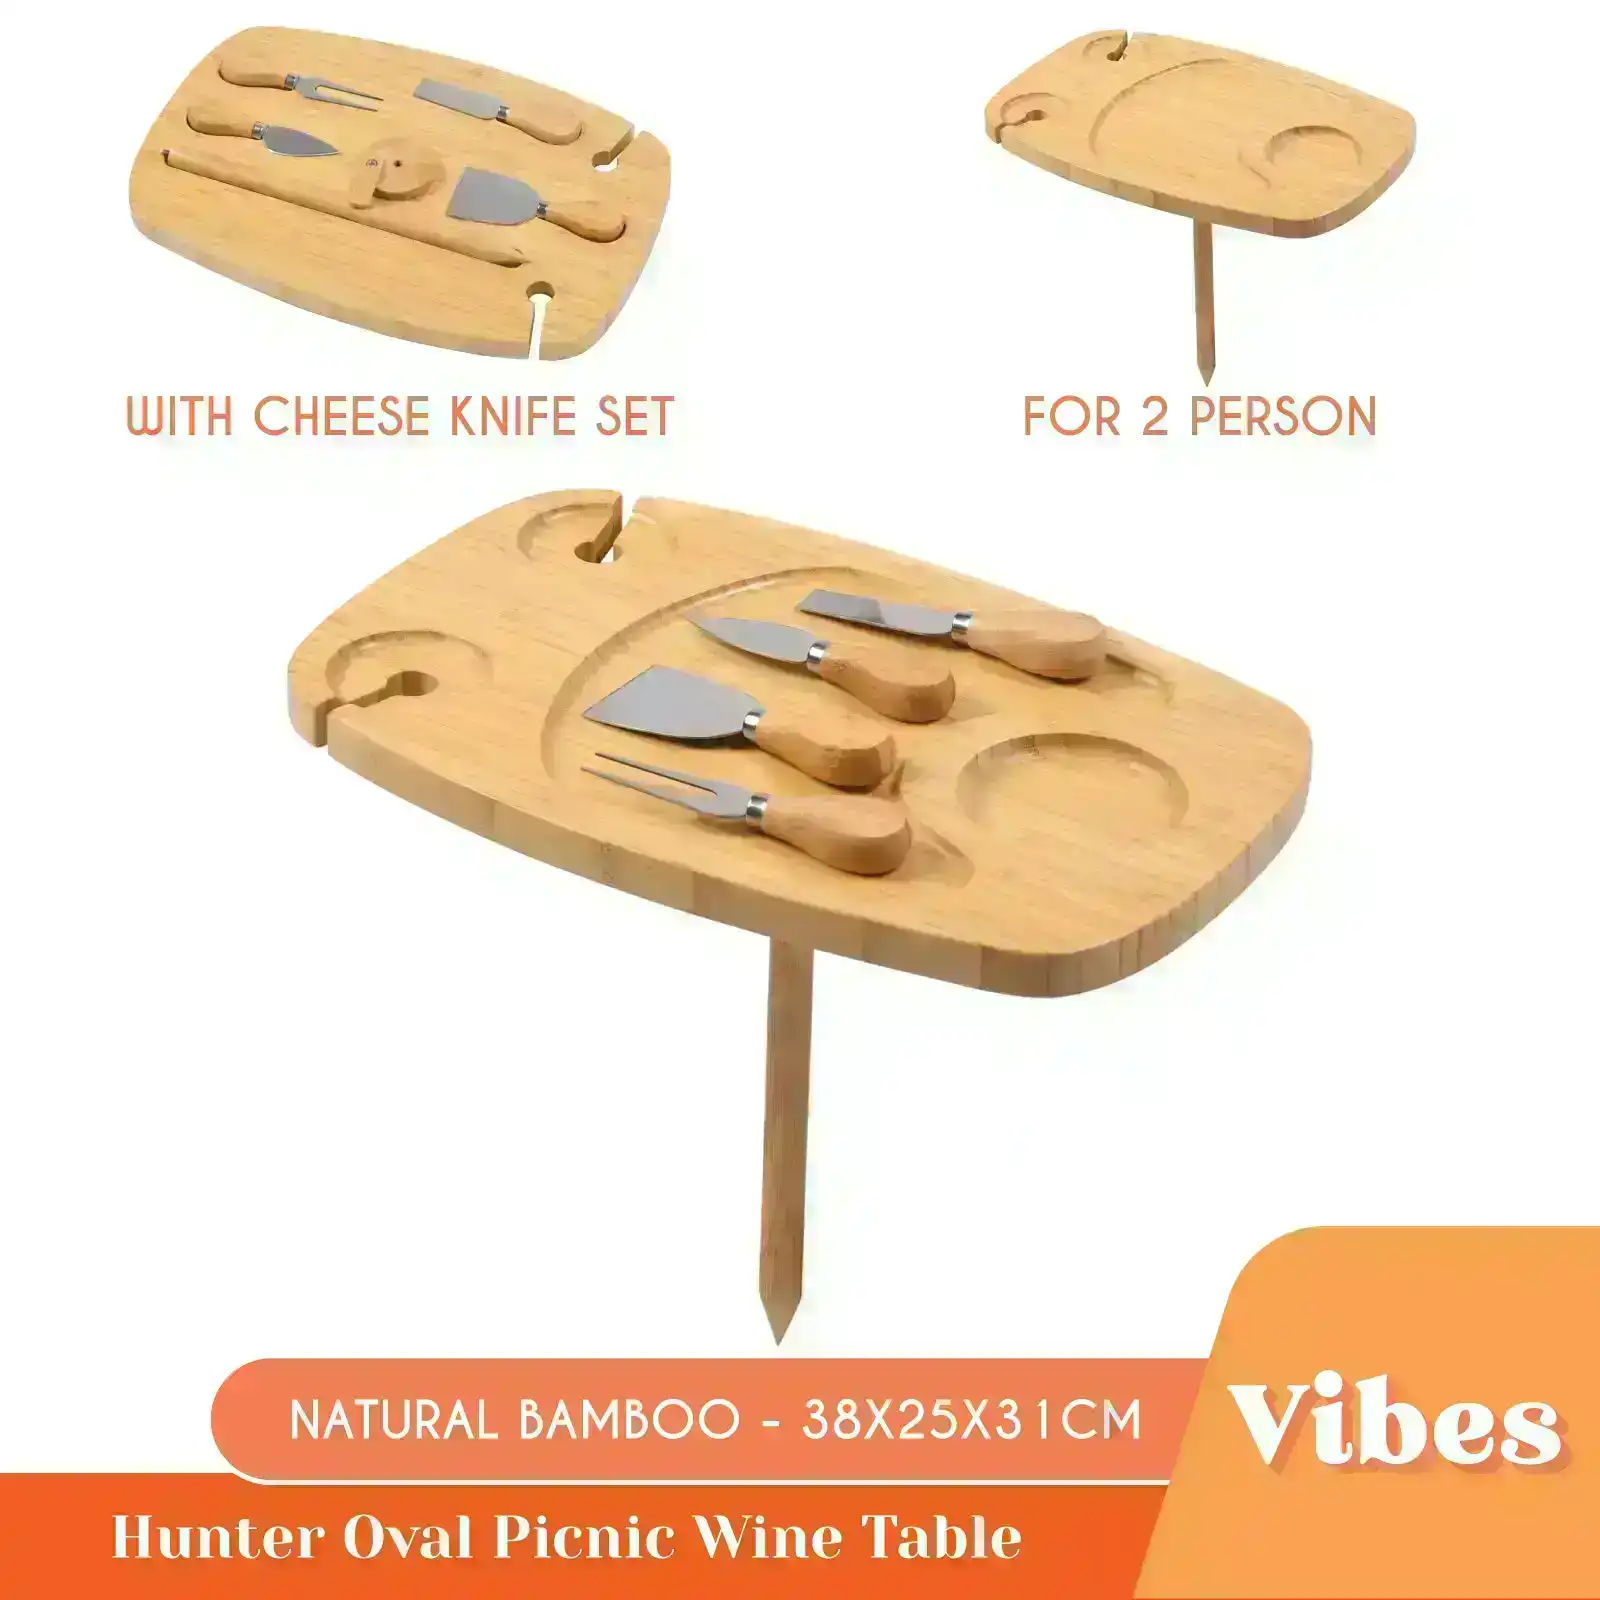 Vibes Hunter 2 Person Oval Picnic Wine Table with Cheese Knife Set - Natural Bamboo 38x25x31cm